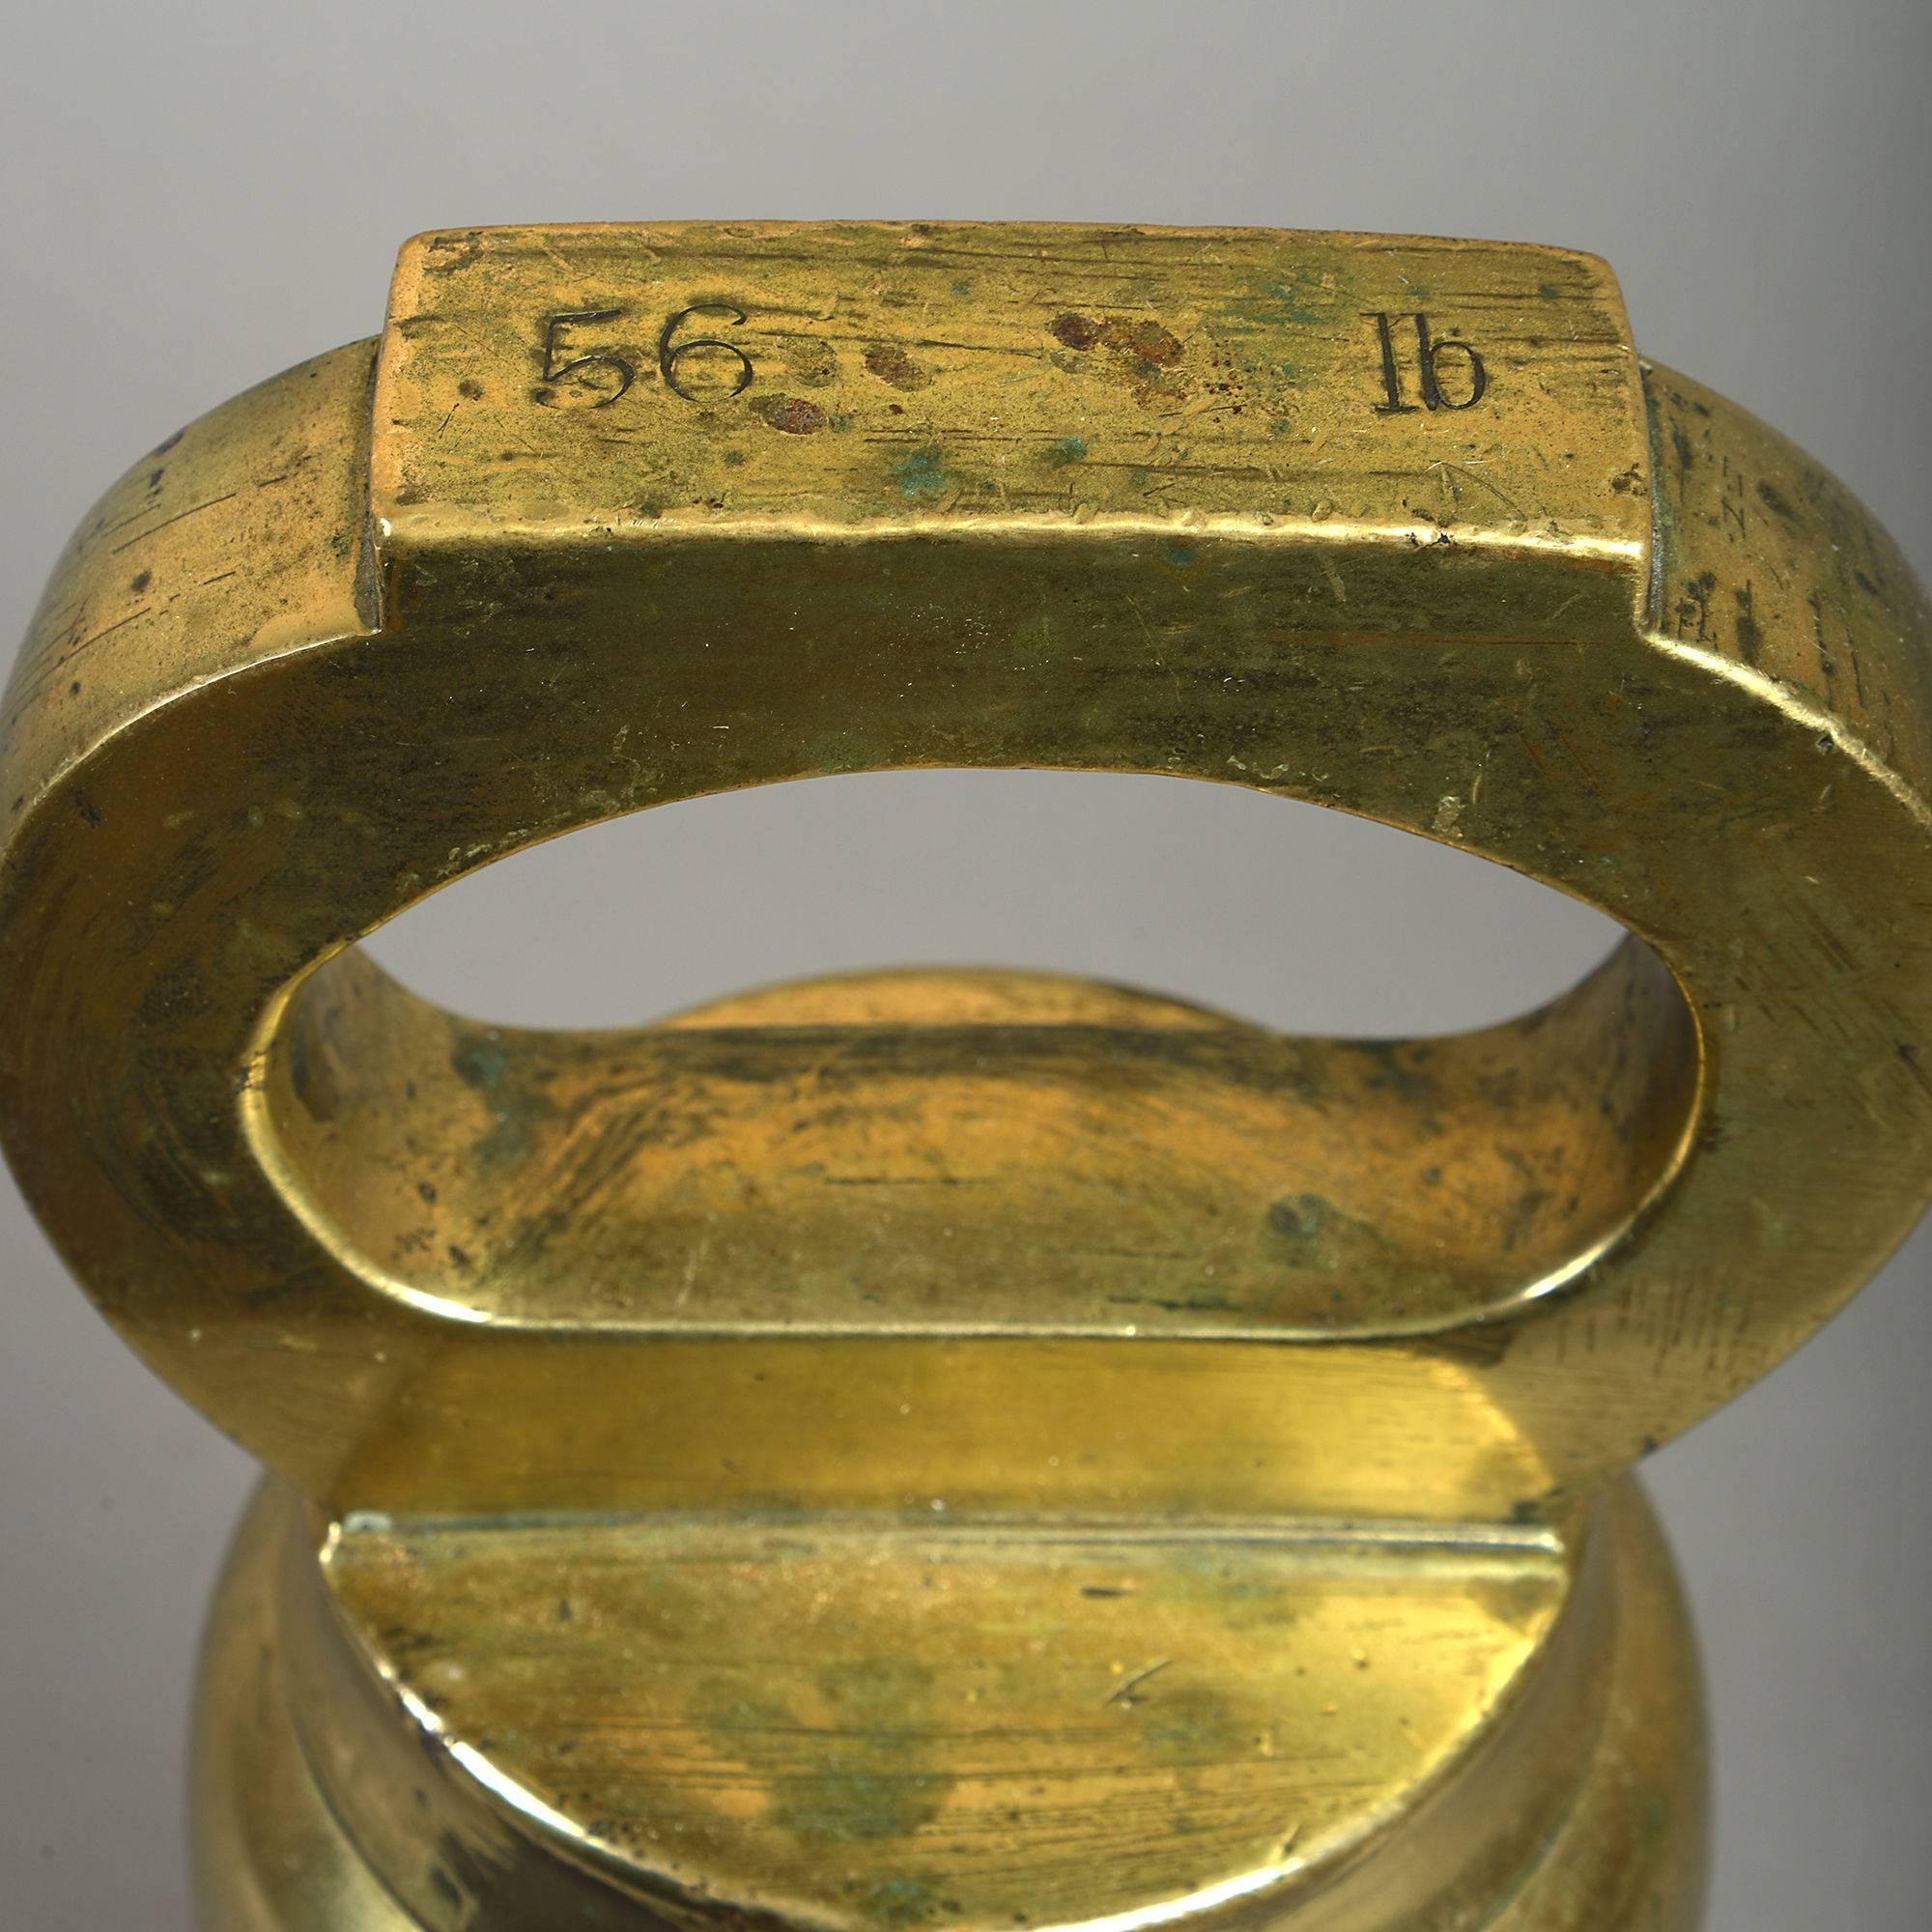 A 19th century official 1/2 CWT brass bell weight, inscribed 56lb 

Brass bell form weights such as these were used throughout the United Kingdom and British Empire in Government offices during the 19th and early 20th centuries. They have a